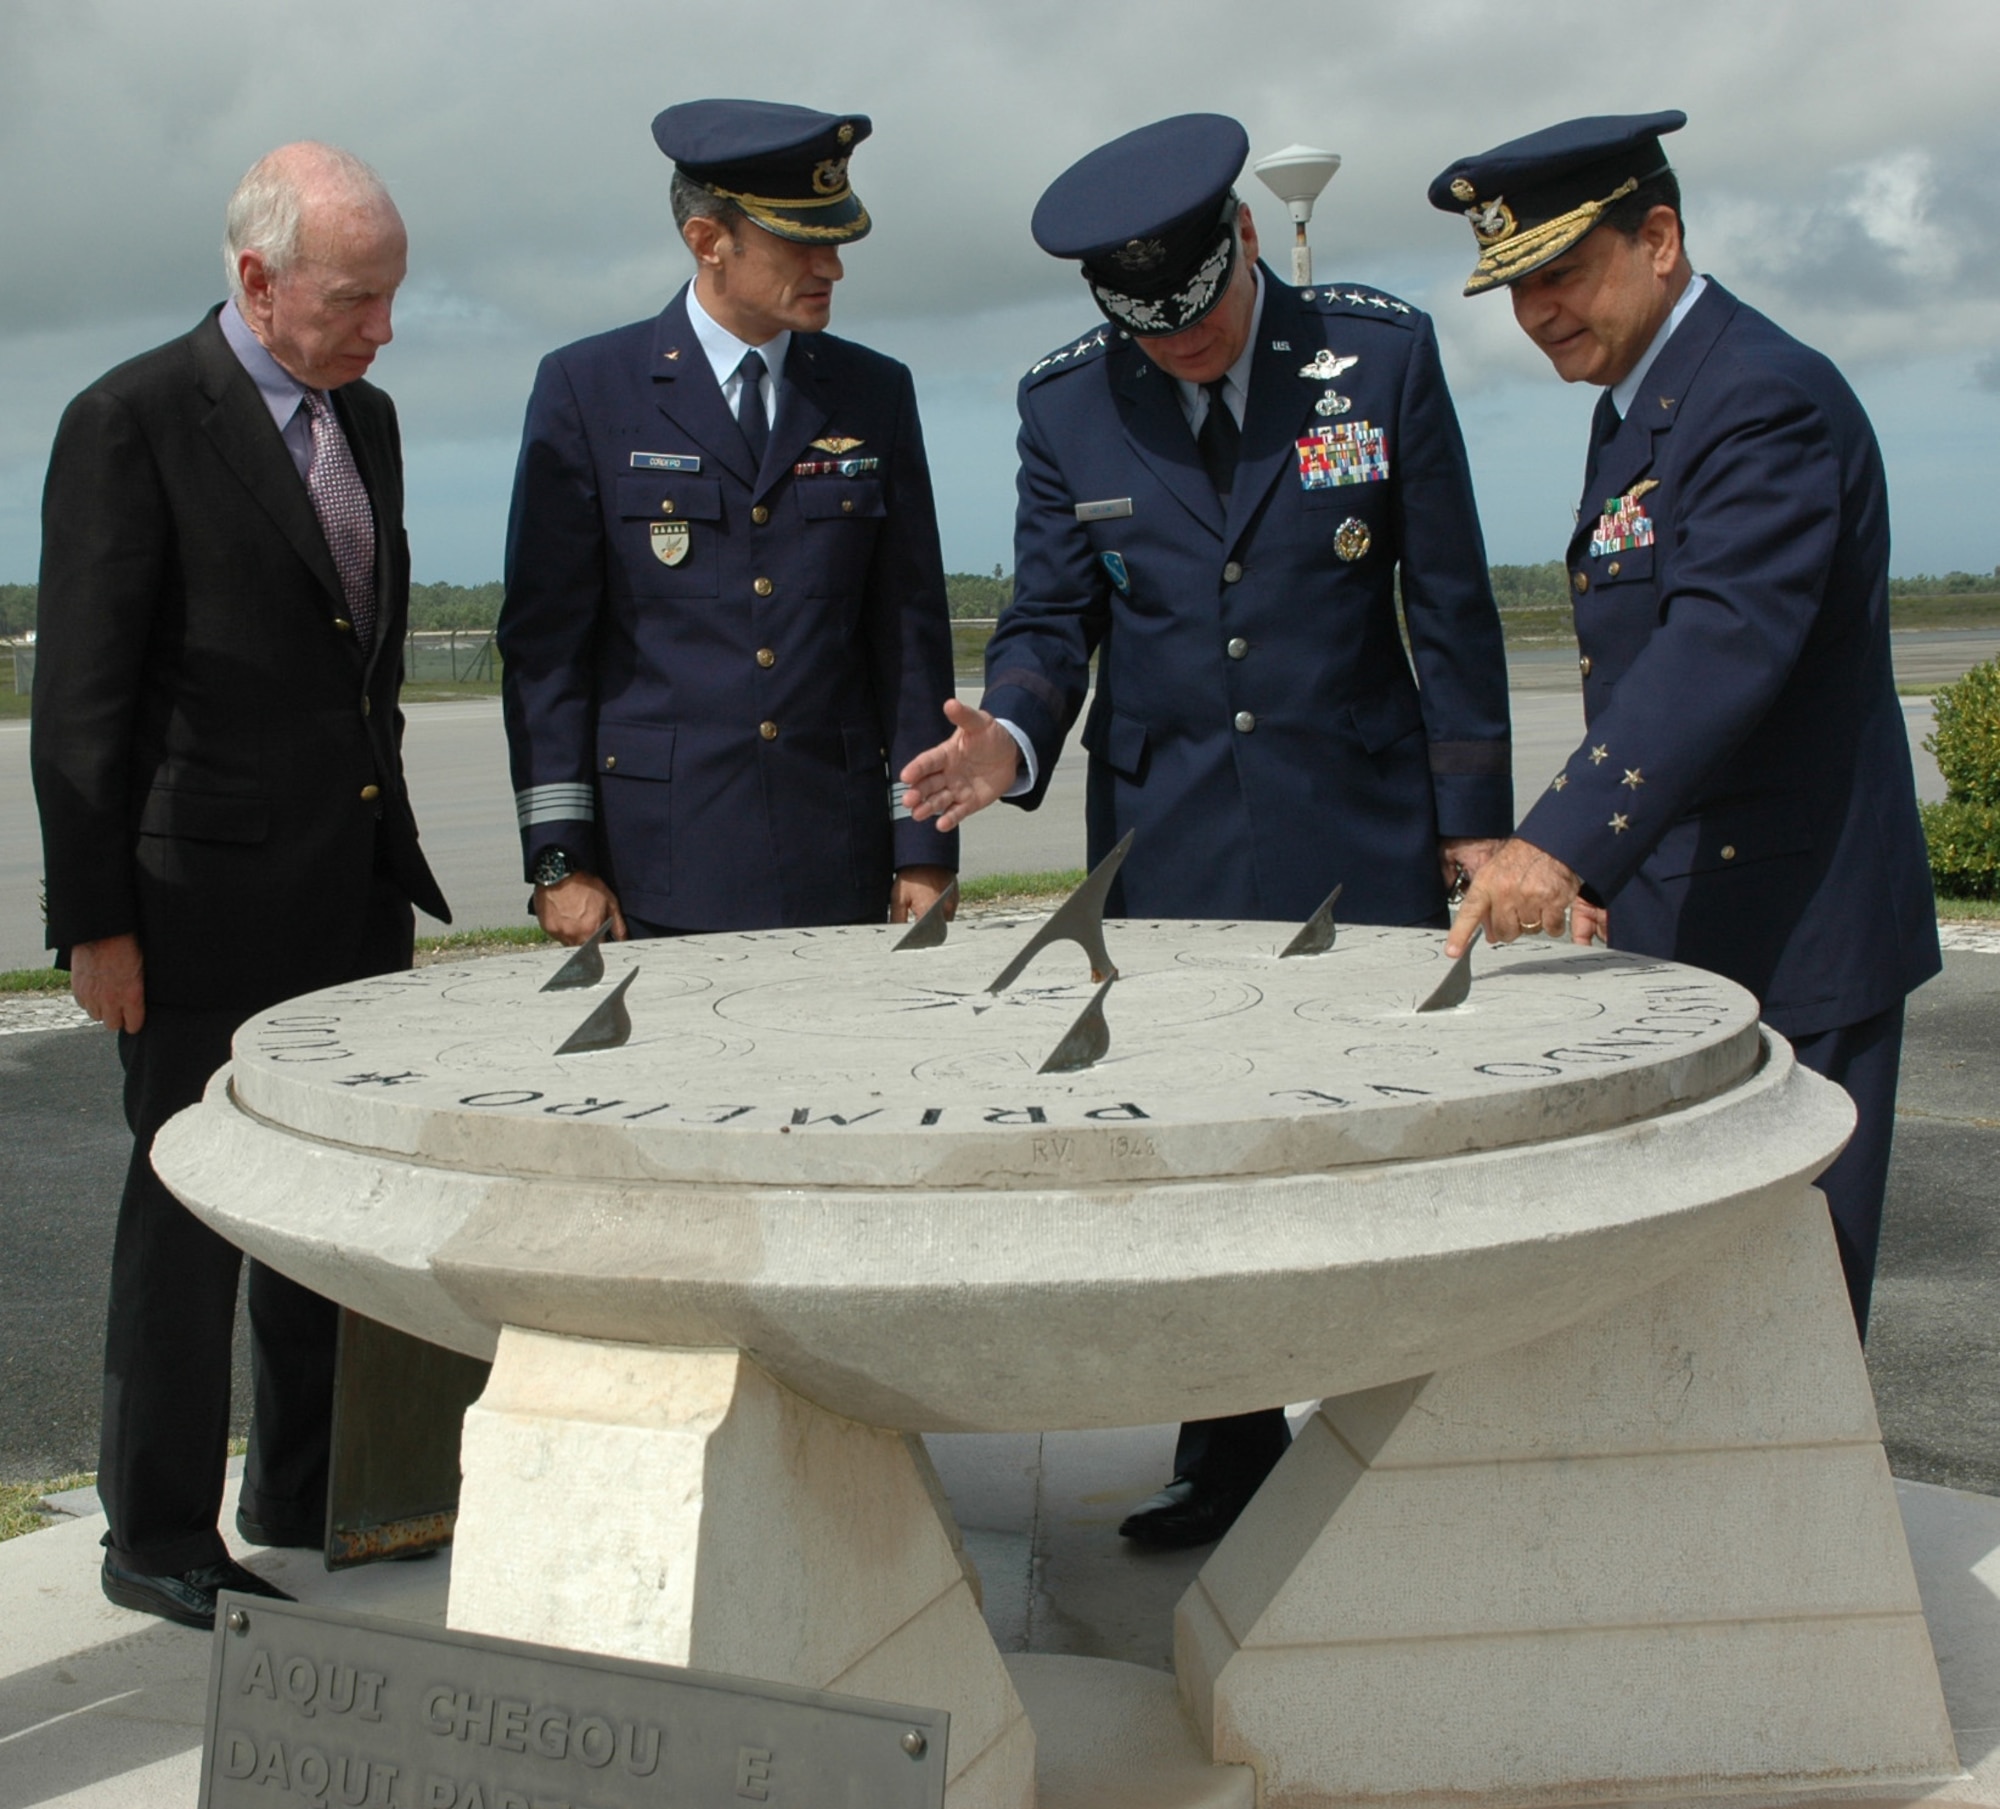 MONTE REAL AIR BASE, Portugal--Gen. Tom Hobbins (second from right), U.S. Air Forces in Europe commander, examines a sundial monument below the air traffic control tower here with Portuguese General Manuel Jose Taveira Martins (right), Portuguese Air Force Chief of Staff, U.S. Ambassador to Portugal Alfred Hoffman (left), and Portuguese Colonel Joao Luis Ramirez de Carvalho Cordeiro, Monte Real Air Base commander, Sep. 29. (U.S. Air Force Photo/Capt. Elizabeth Culbertson)